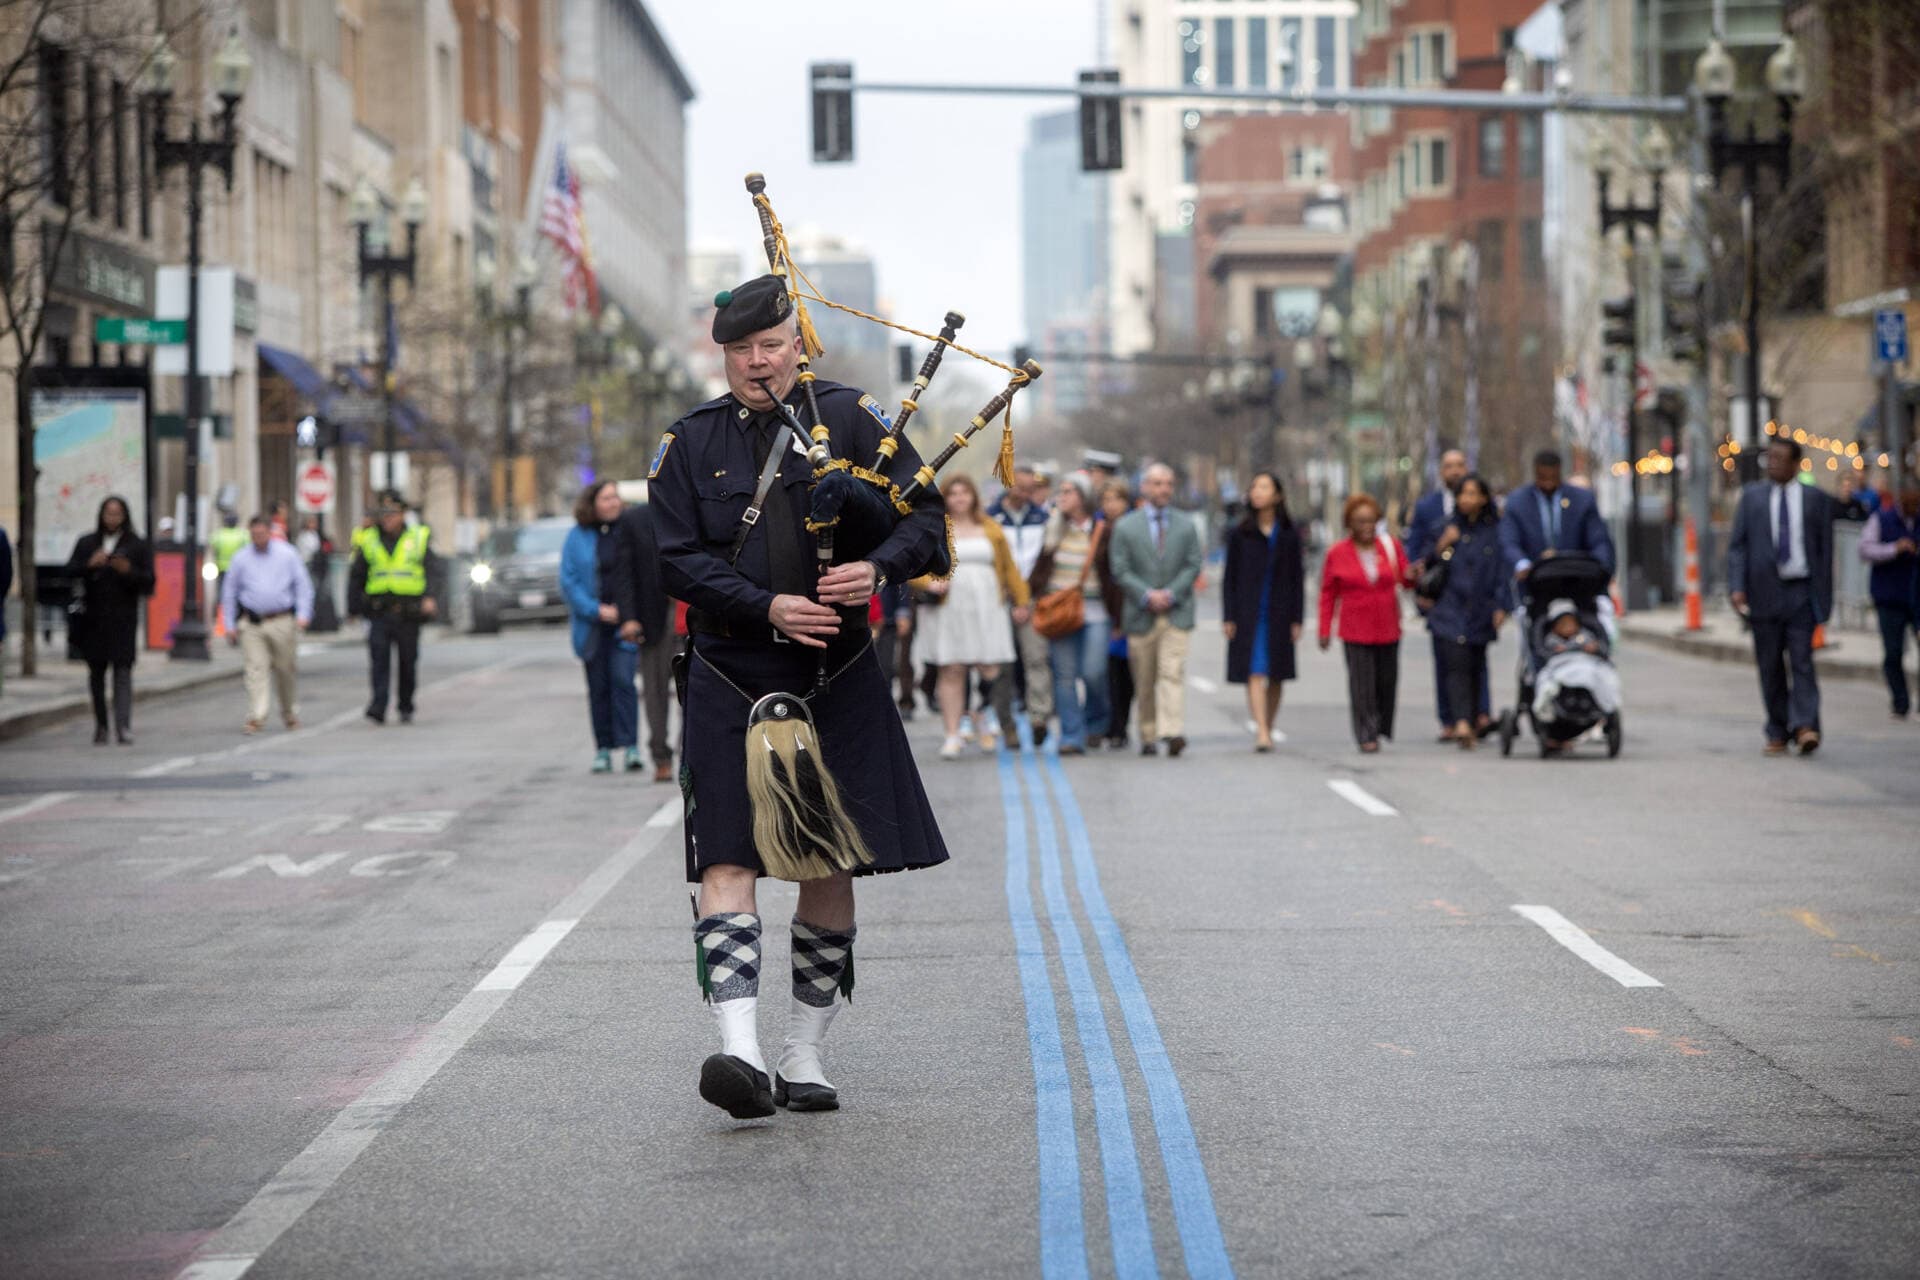 A bagpiper leads Gov. Maura Healey and Mayor Michelle Wu along Boylston Street at a remembrance with families who lost loved ones at the 2013 Boston Marathon bombings. (Robin Lubbock/WBUR)